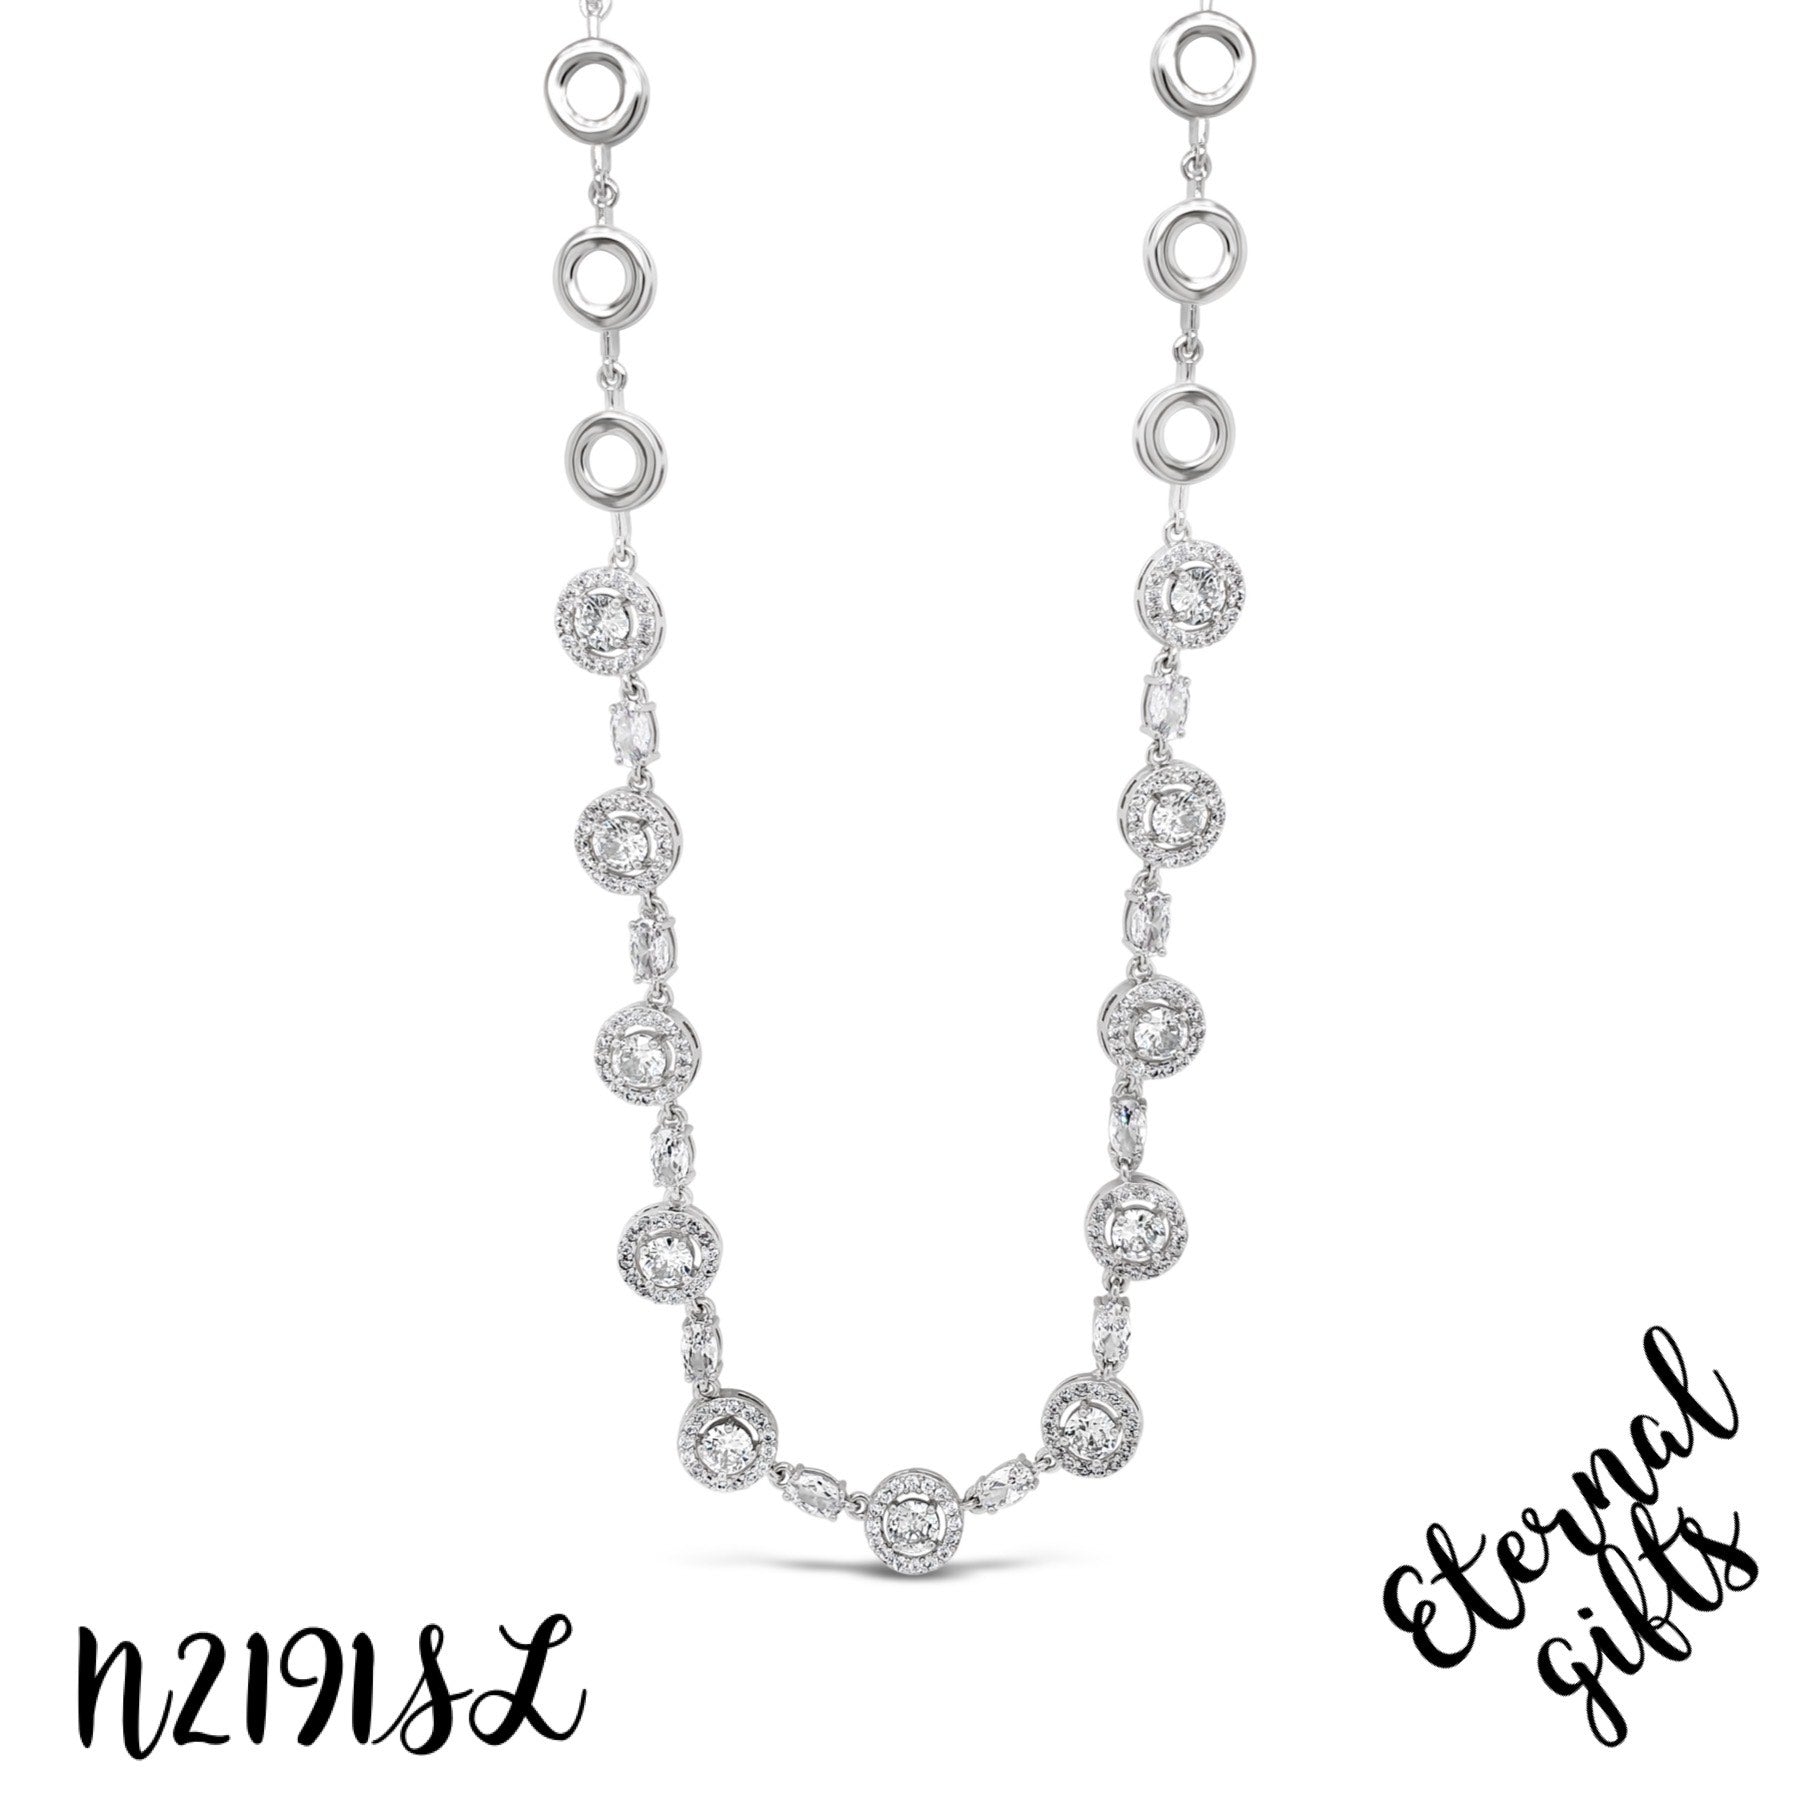 Classic Halo White Diamond Crystal Necklace N2191SL - Absolute Jewellery